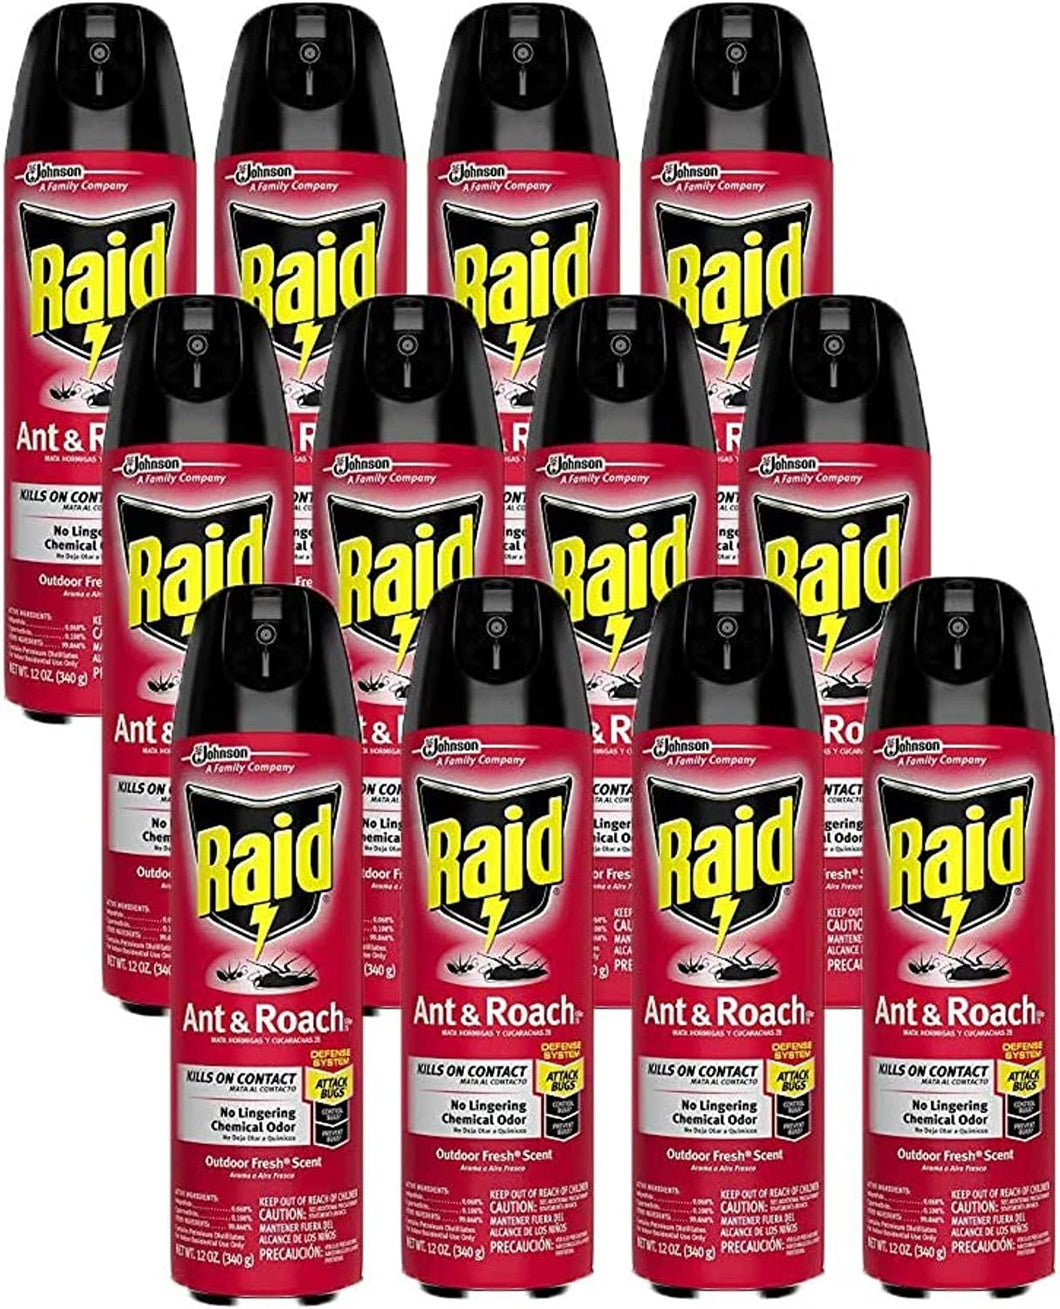 Raid Ant & Roach Killer Spray for Listed Bugs, Insect, Spider, For Indoor Use, Fresh Scent, 12 Oz, Pack of 12